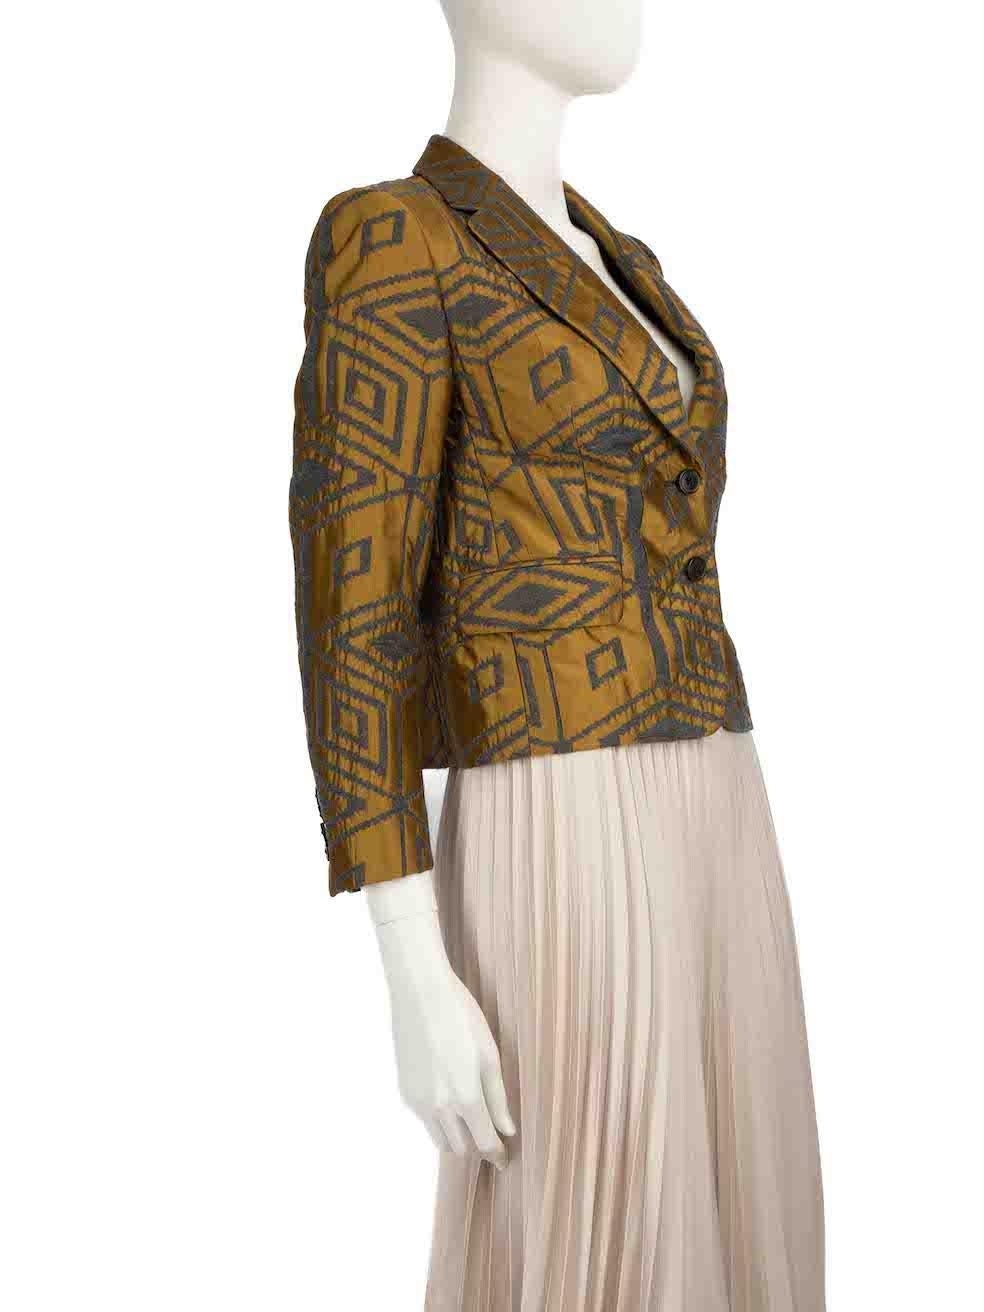 CONDITION is Very good. Minimal wear to blazer is evident. Minimal wear to right sleeve with plucks to the jacquard on this used Dries Van Noten designer resale item.
 
 
 
 Details
 
 
 Khaki
 
 Wool
 
 Short length blazer
 
 Abstract jacquard